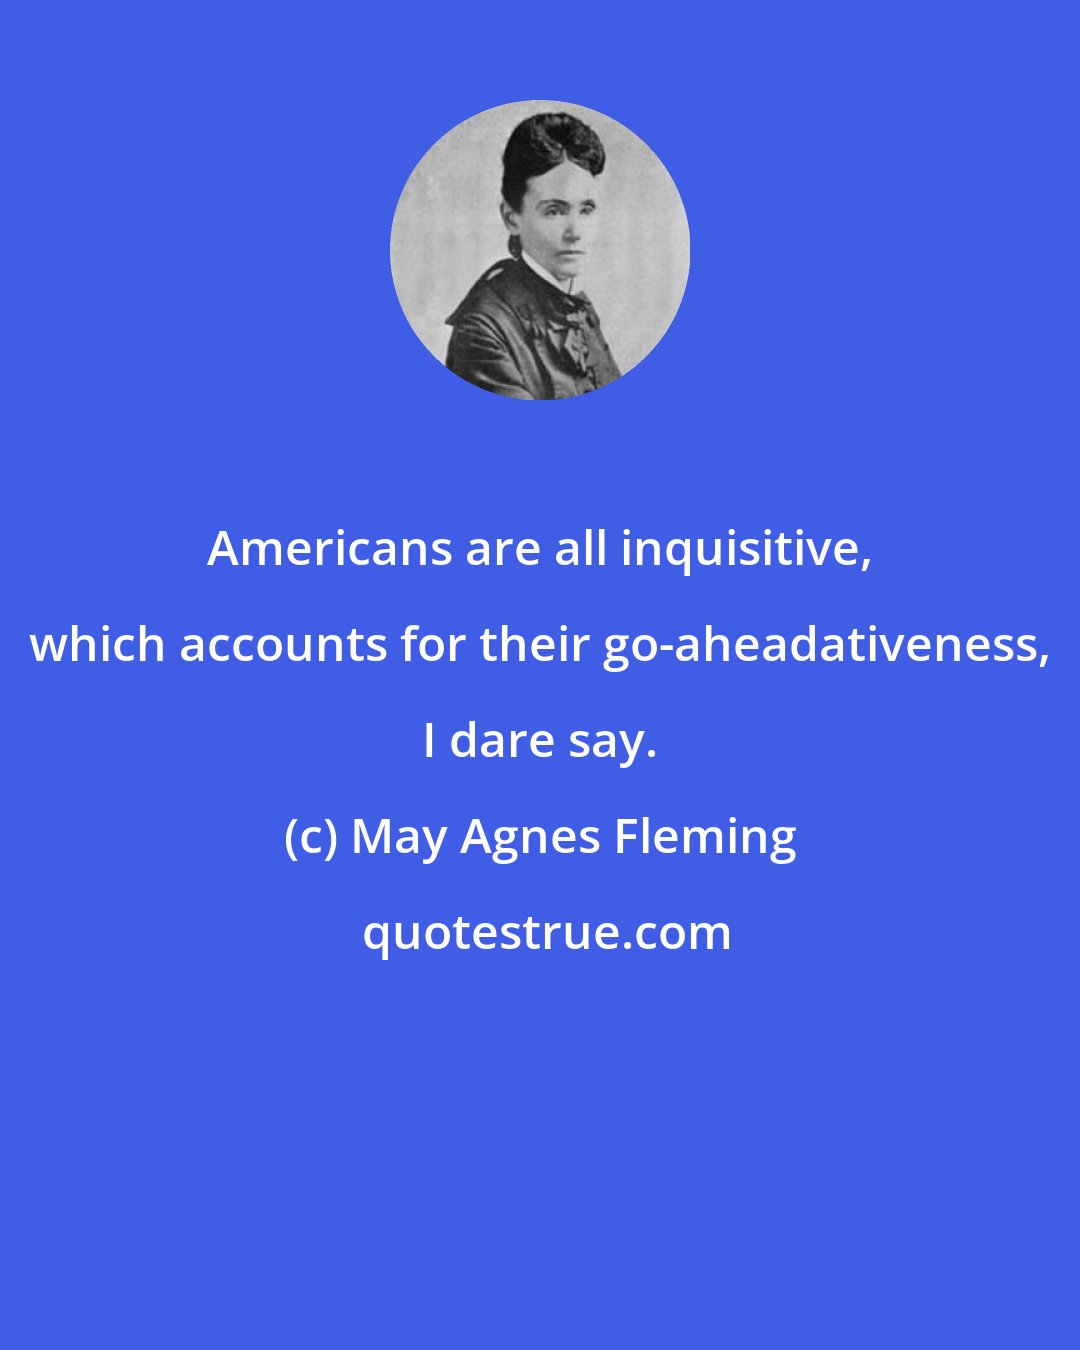 May Agnes Fleming: Americans are all inquisitive, which accounts for their go-aheadativeness, I dare say.